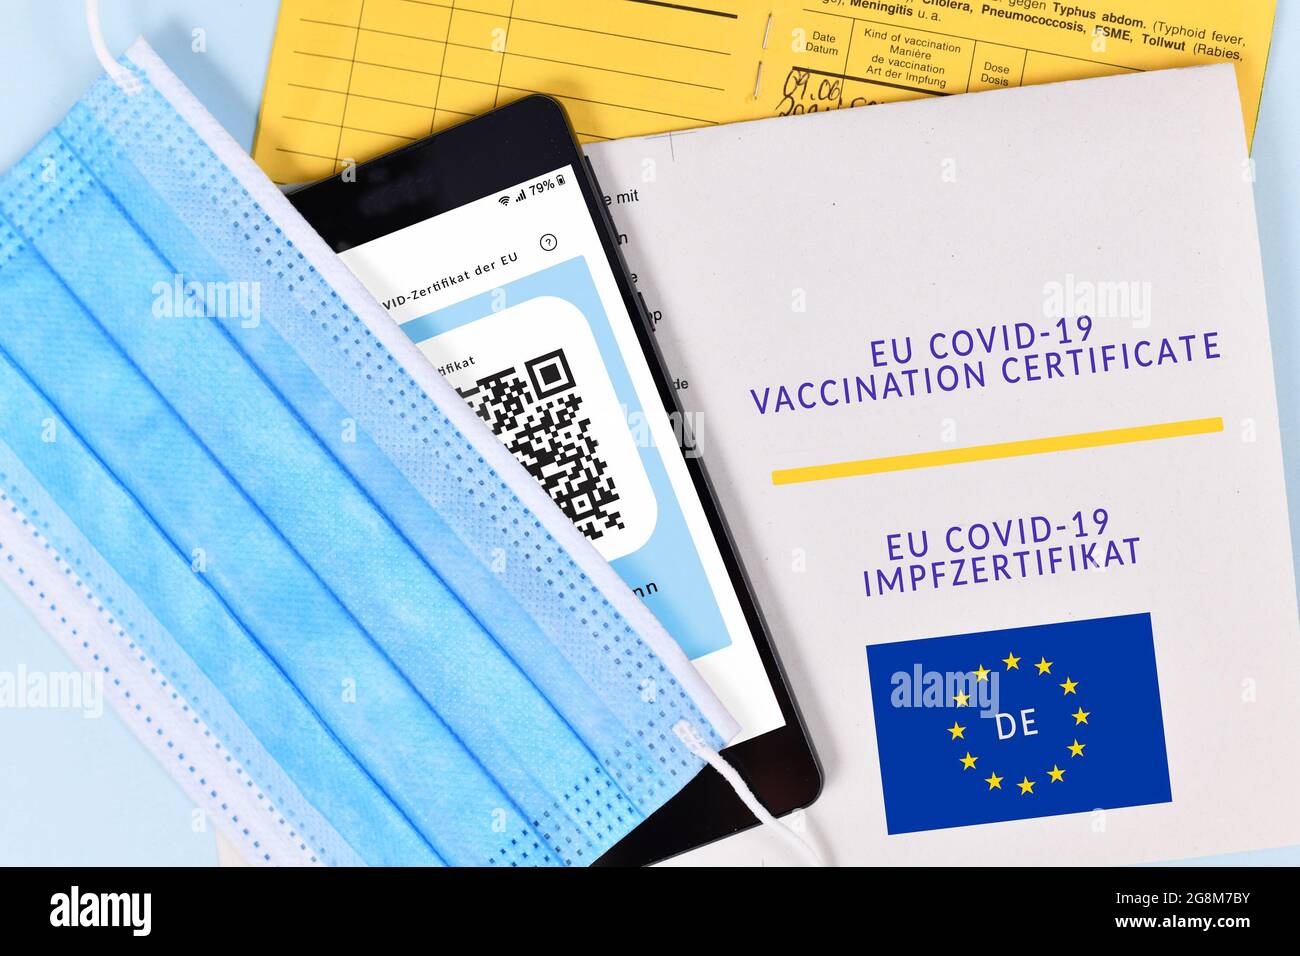 EU COVID-19 Vaccination certificate on paper and digital on mobile phone, vaccine passport and face mask Stock Photo